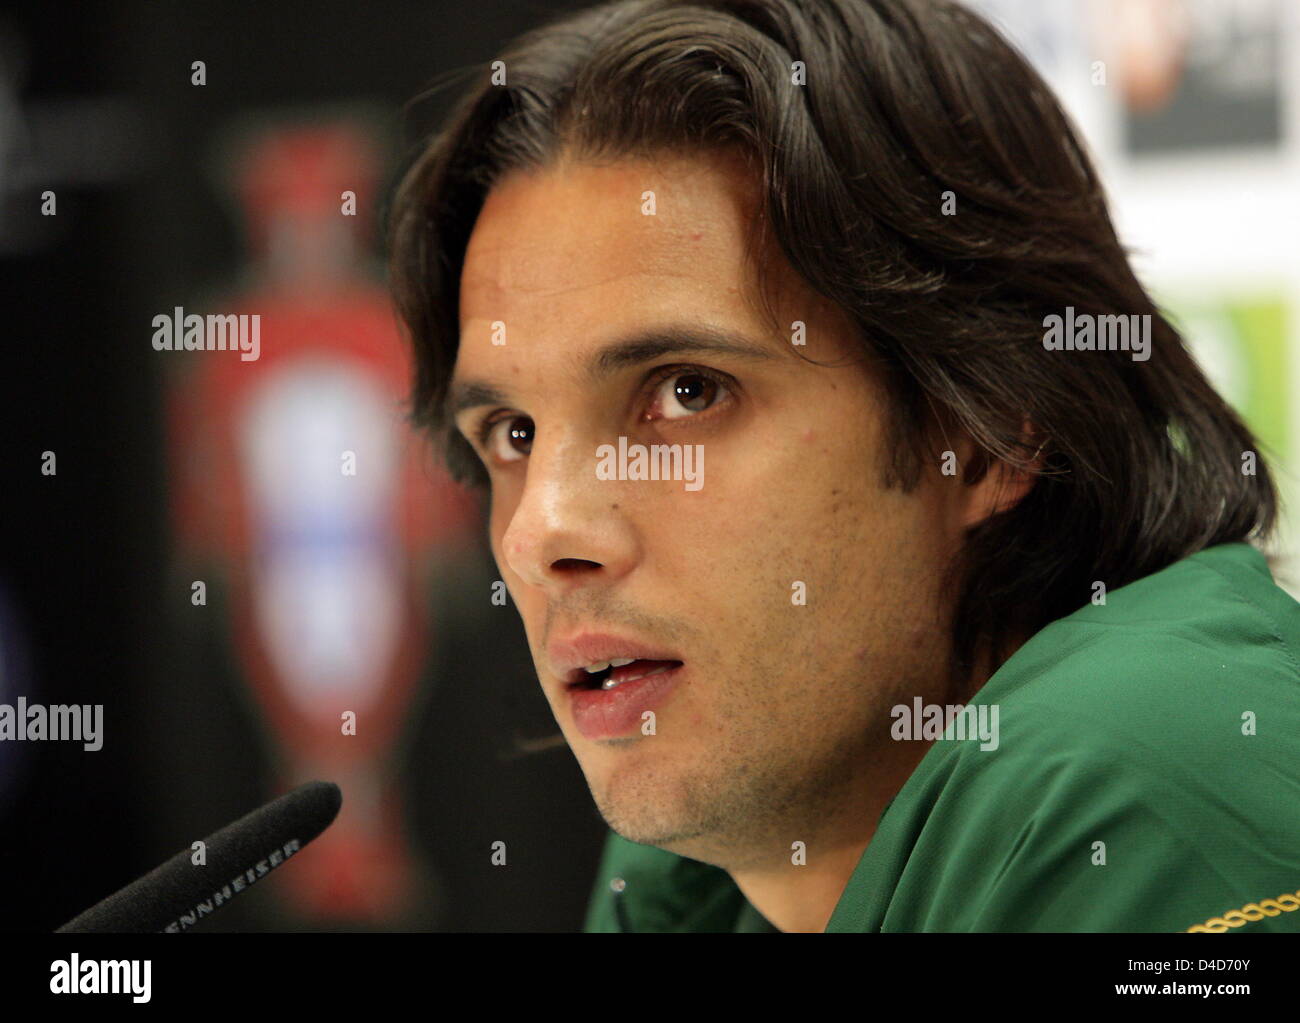 Portuguese national soccer player Nuno Gomes is pictured during a press conference in Duesseldorf, Germany, 25 March 2008. Portugal faces Greece in a international friendly in Duesseldorf on 26 March 2008. Photo: FEDERICO GAMBARIN Stock Photo